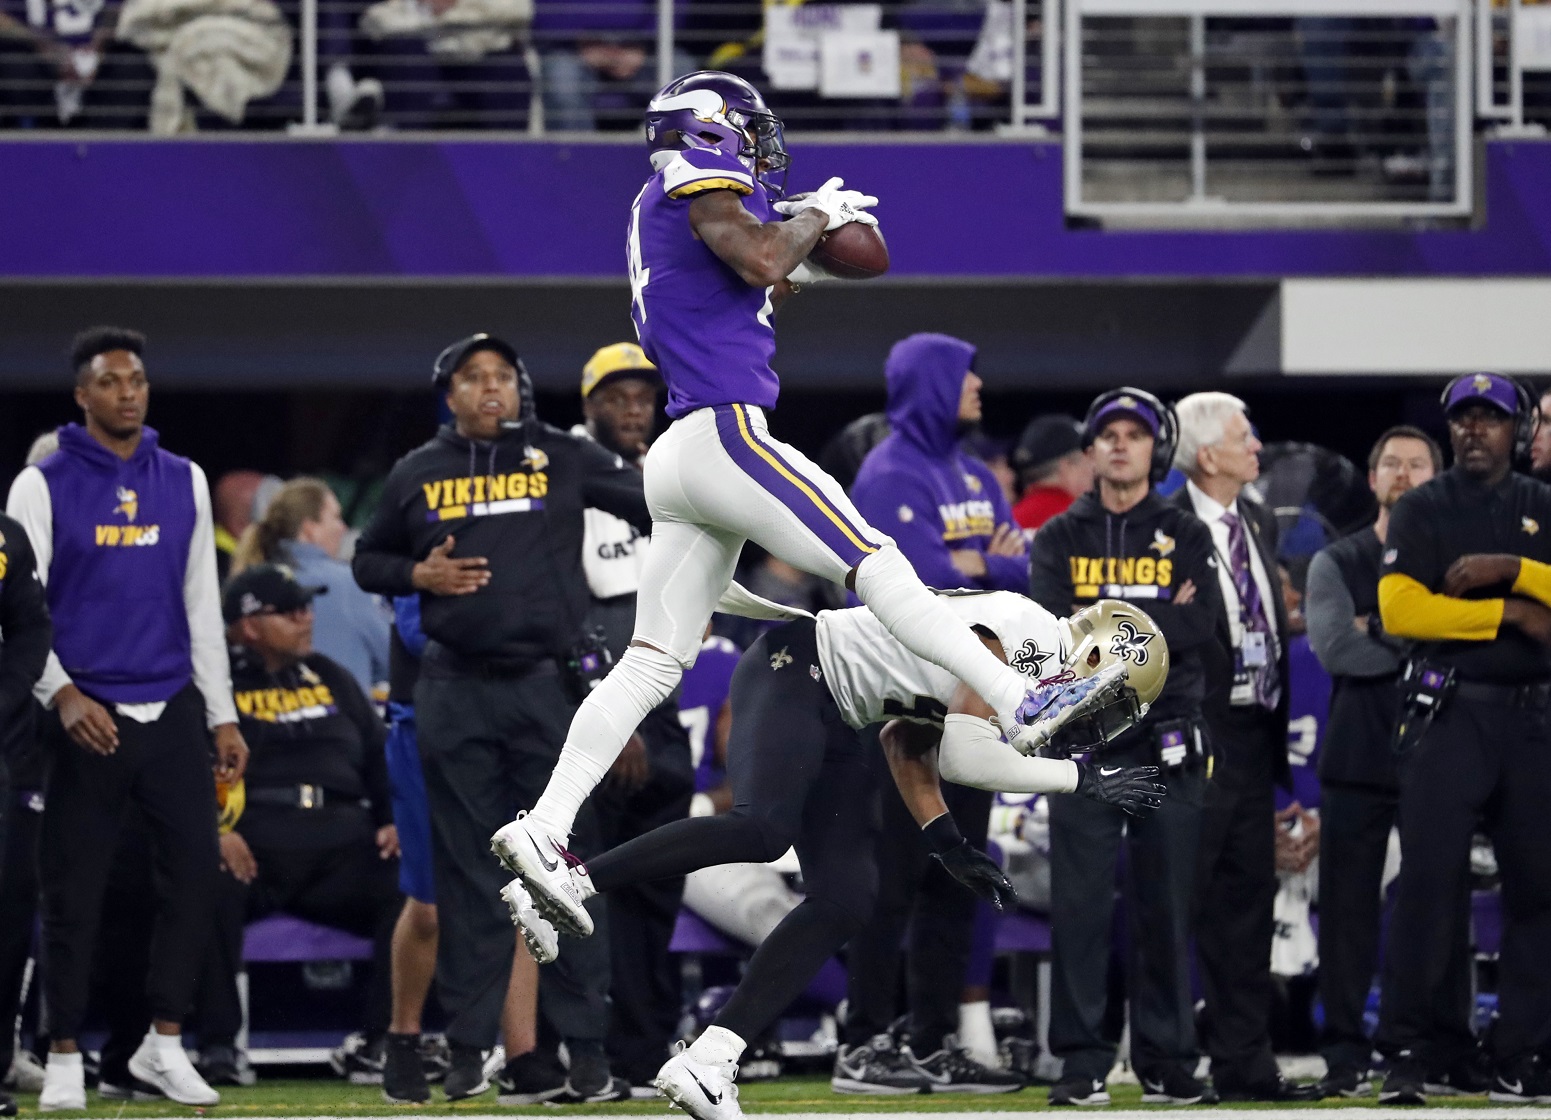 Another Minneapolis Miracle? Saints sure hope not